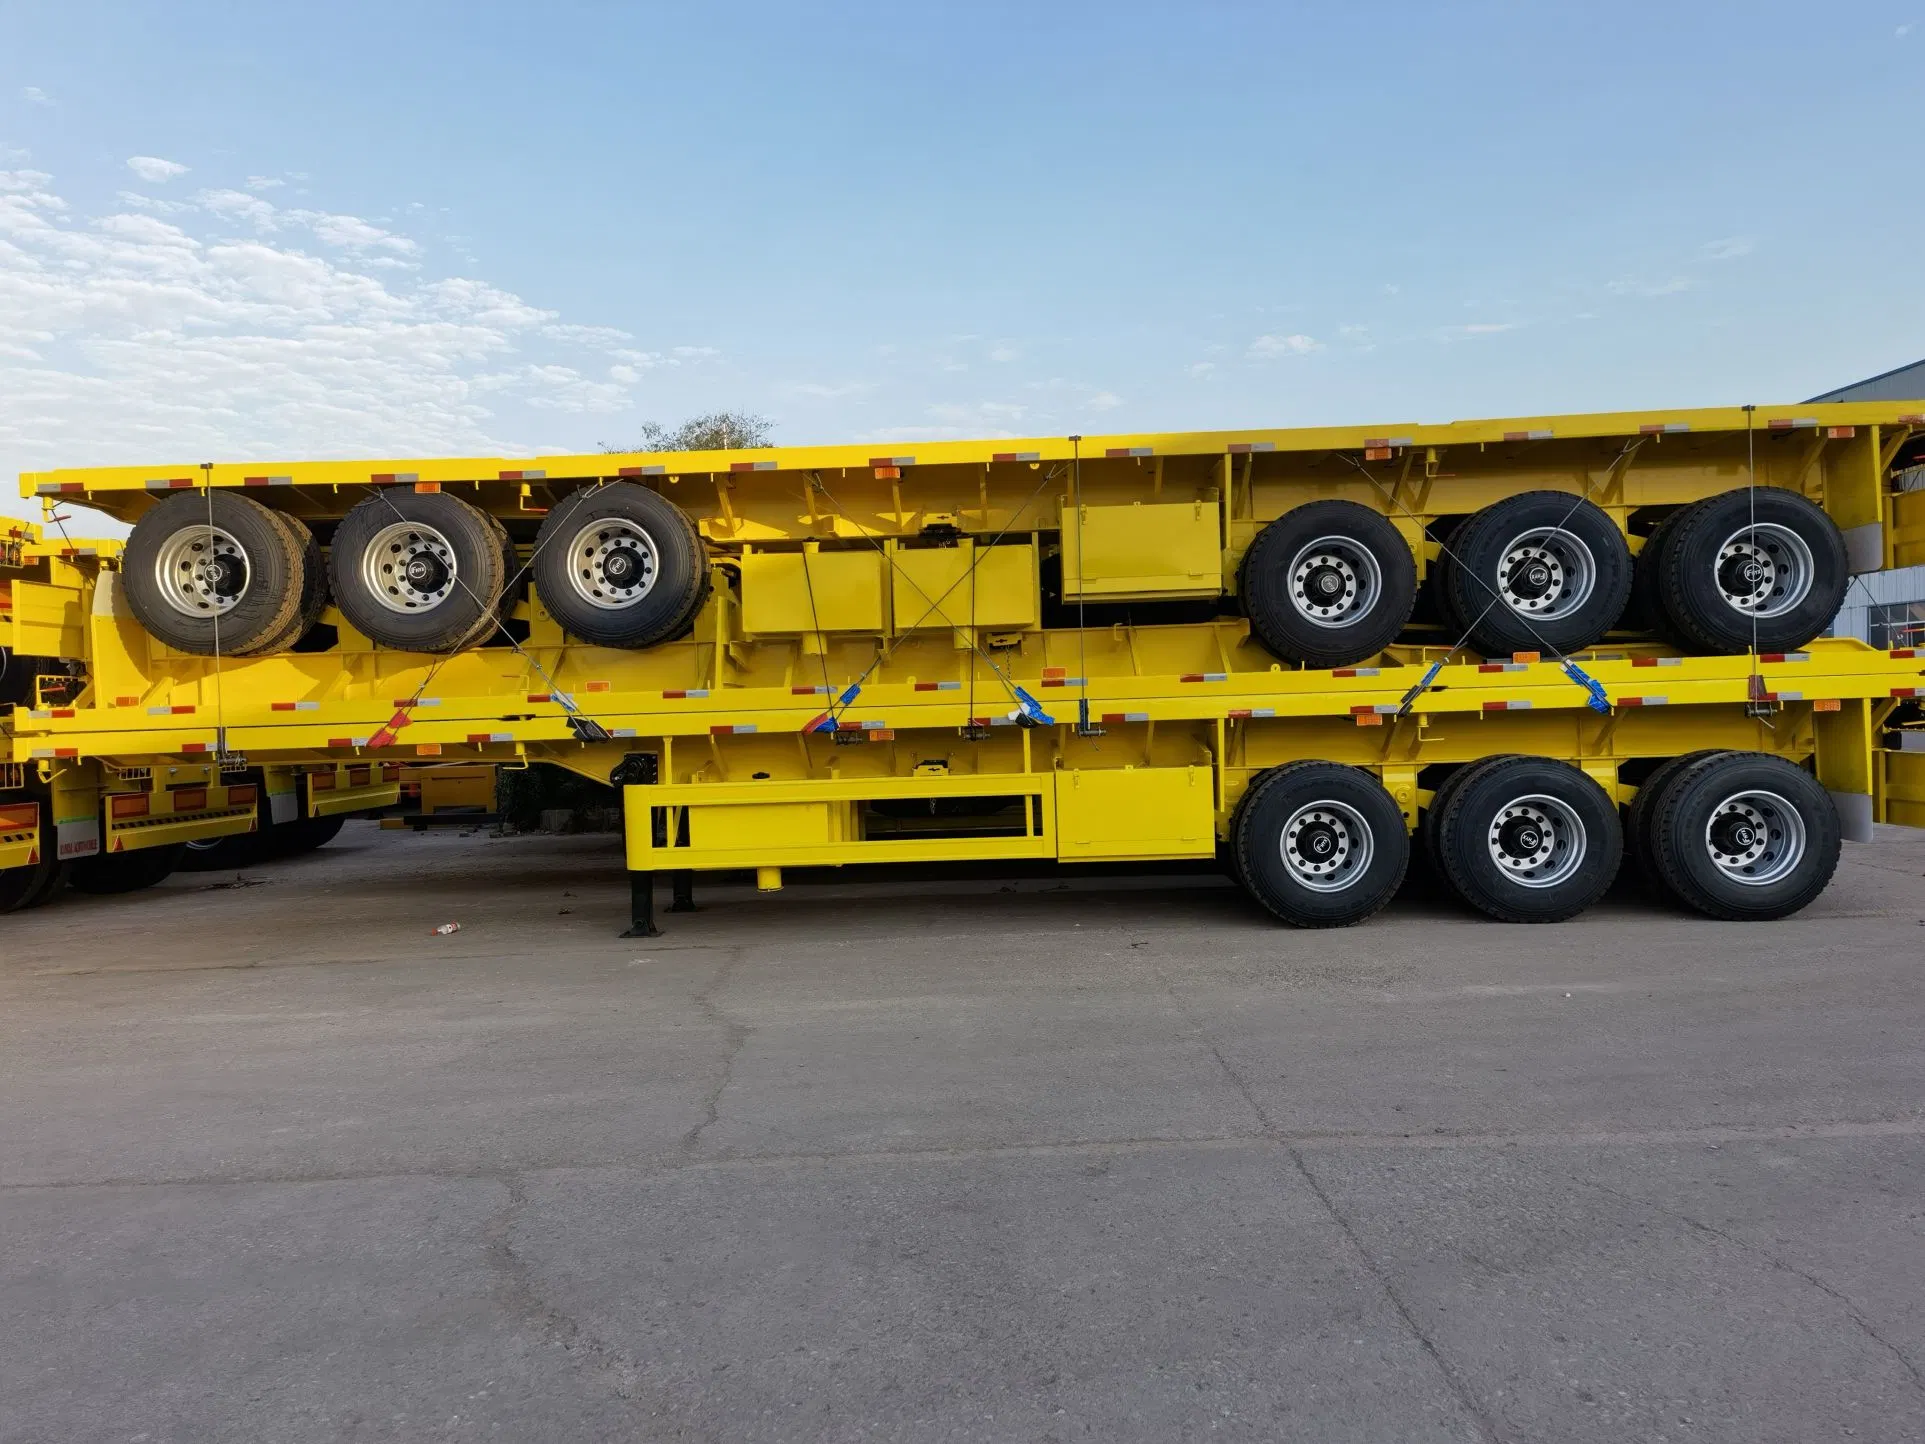 Brand New Flatbed Flat Deck Trailers for Sale Truck Trailers Semi Trailer Dump Trailer Fuel Tanker Semi Trailer Other Trailer Parts Fence Trailer Price